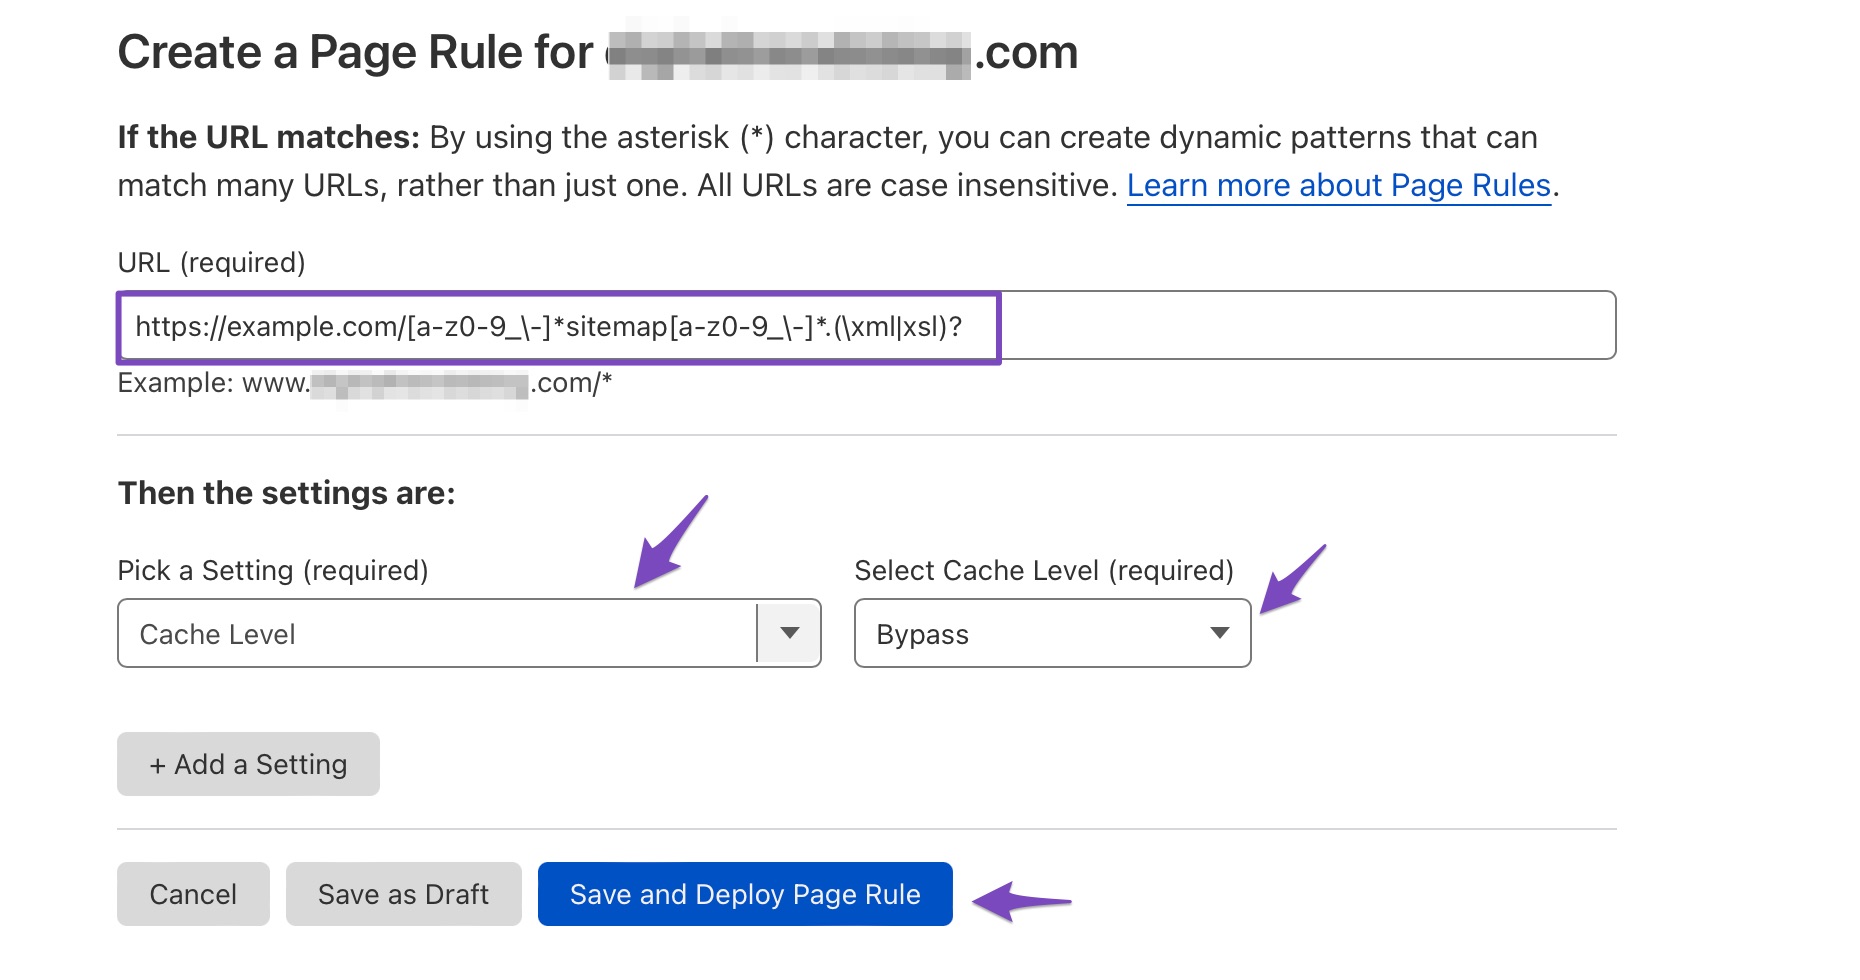 Create a Page Rule to exclude sitemap